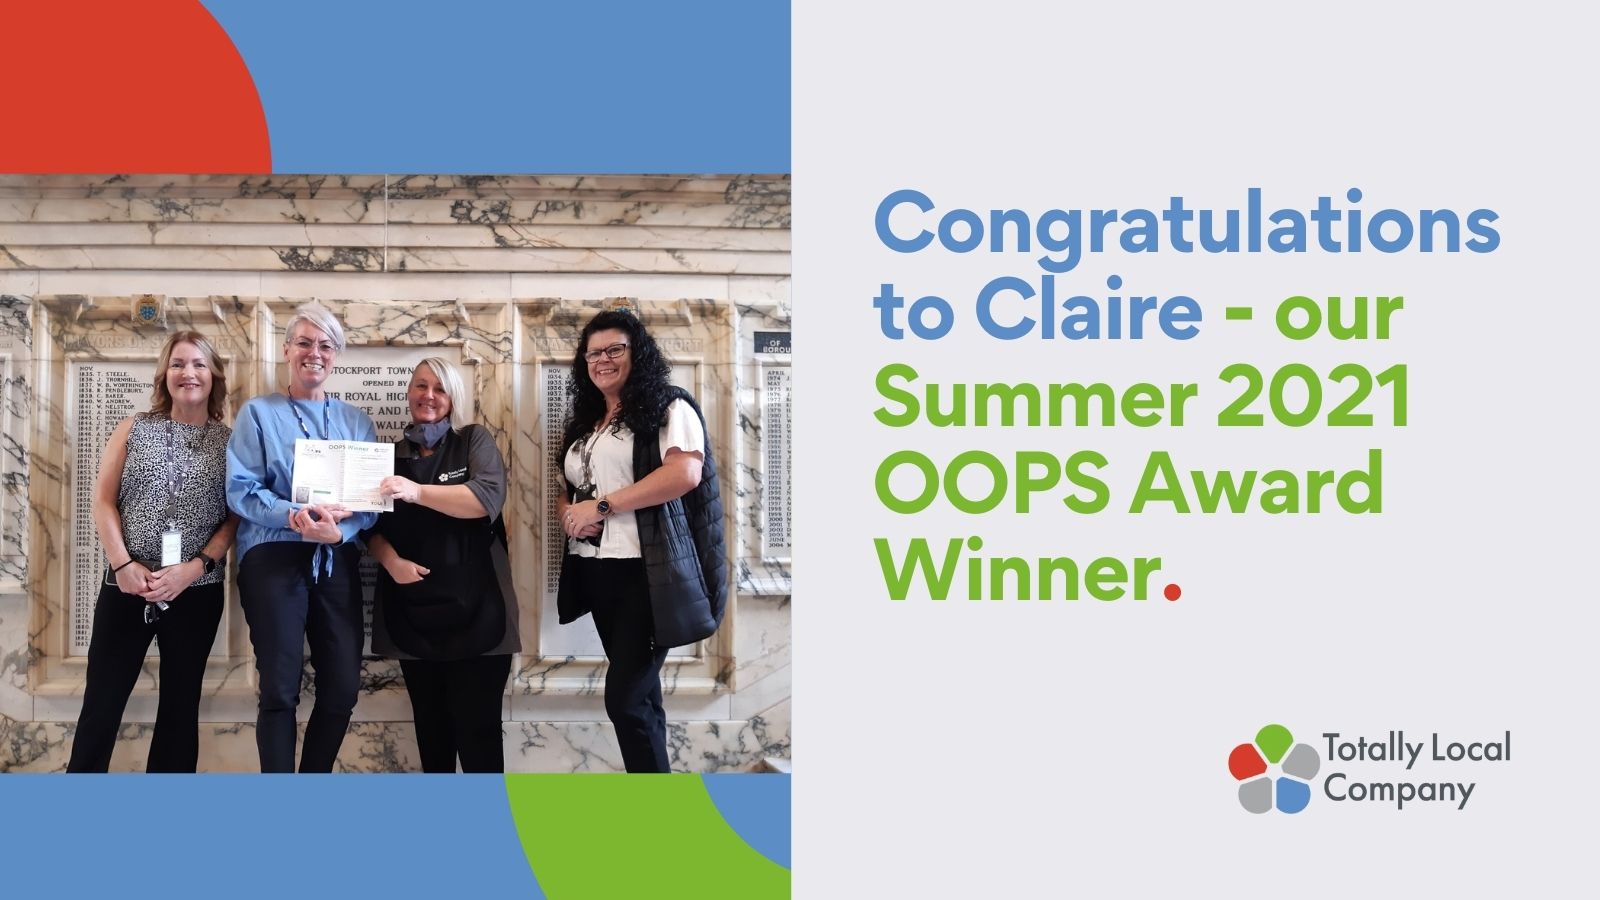 wording - congratulations to claire - our Summer 2021 OOPS award winner, picture of four women with Stockport Town Hall memorial image in the background